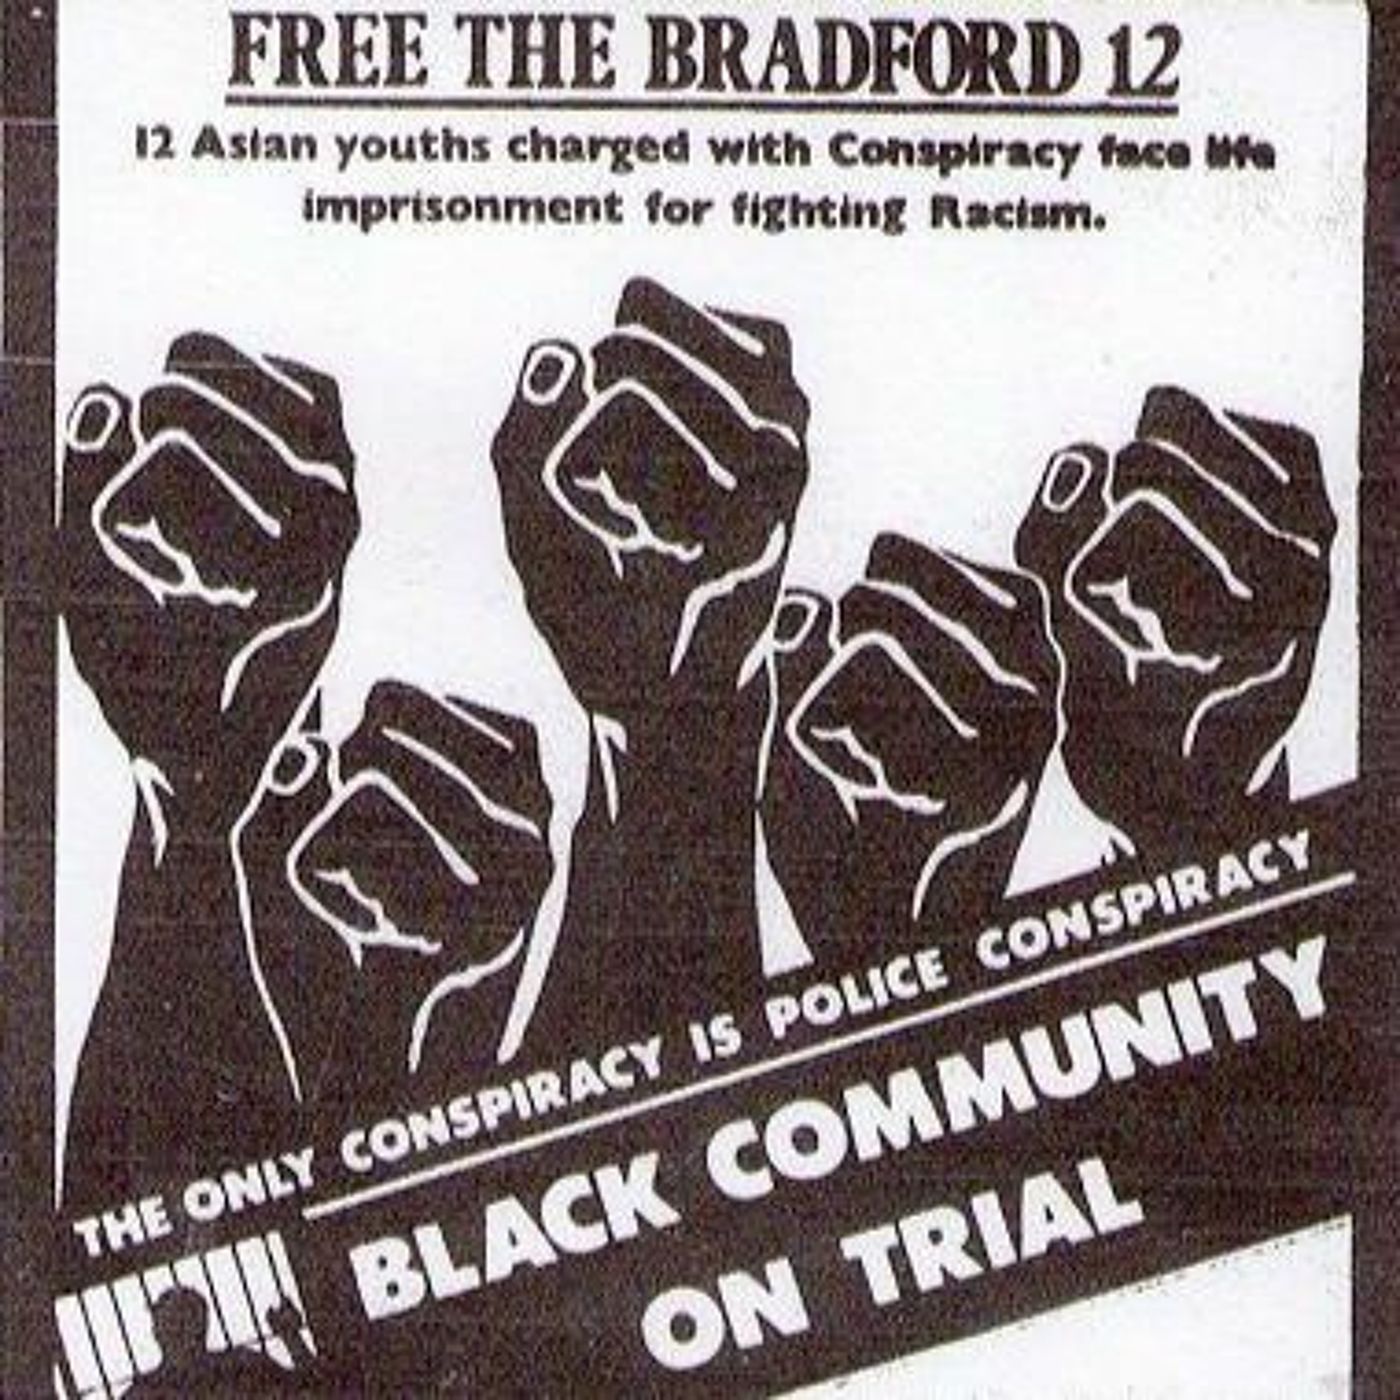 E34: Asian youth movements in Bradford, part 2